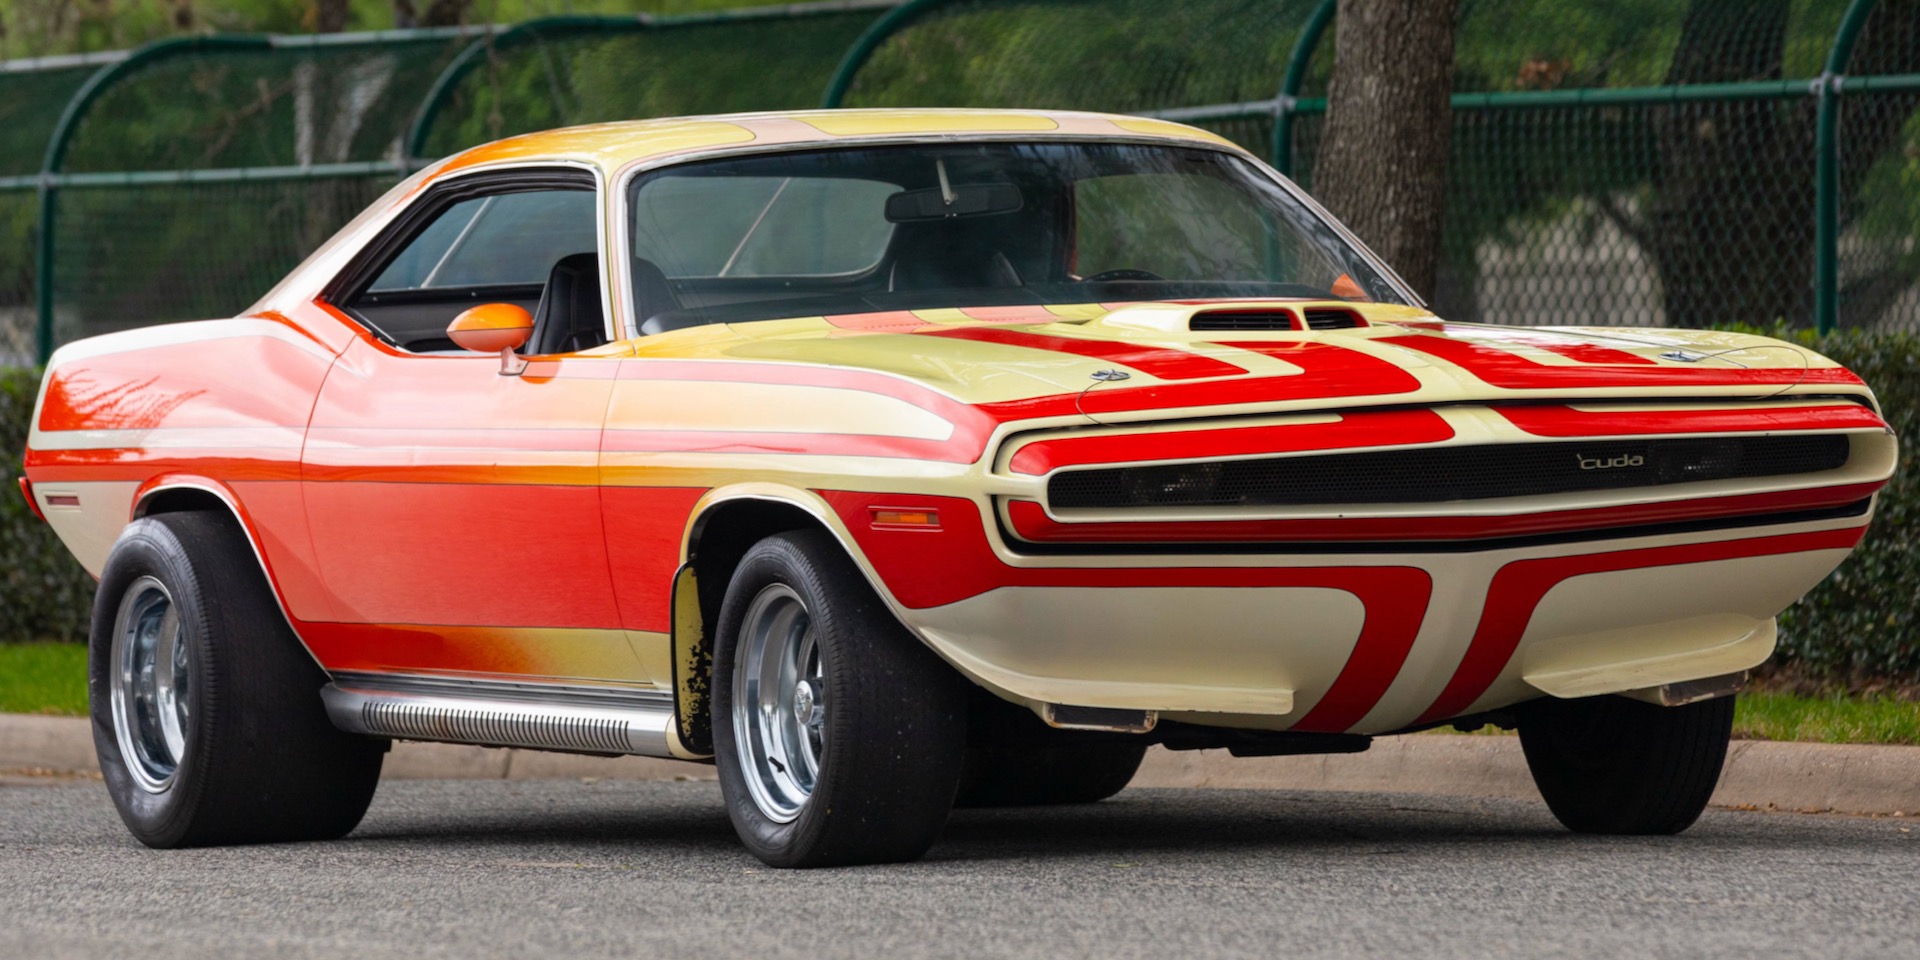 1970 Plymouth Cuda 440 Speedy Transit reappears, heads to public sale